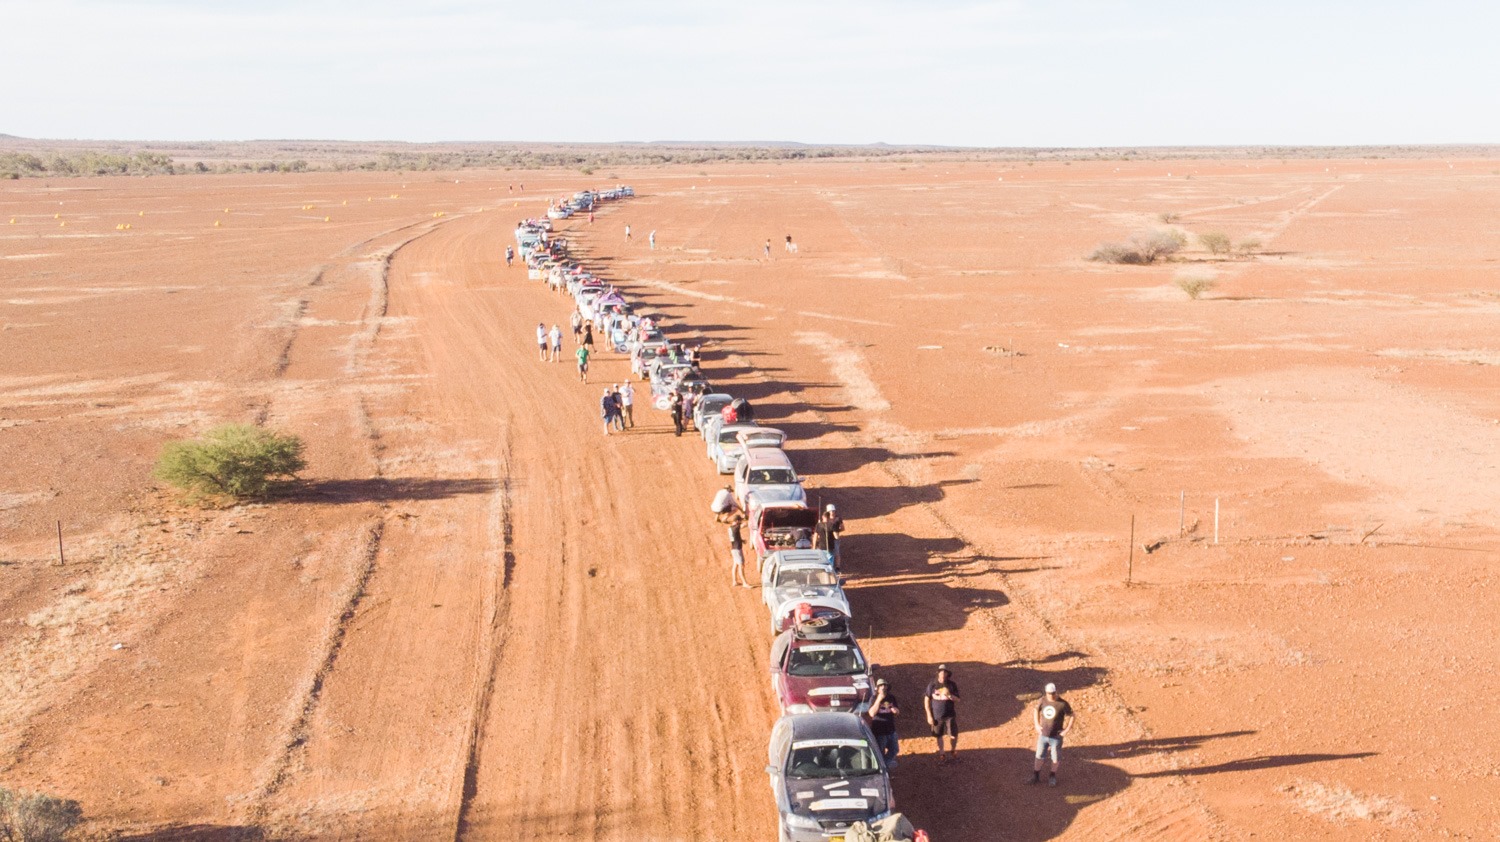 A rally fundraiser that took off today will stop in Silverton during its 3200km journey to South Australia.